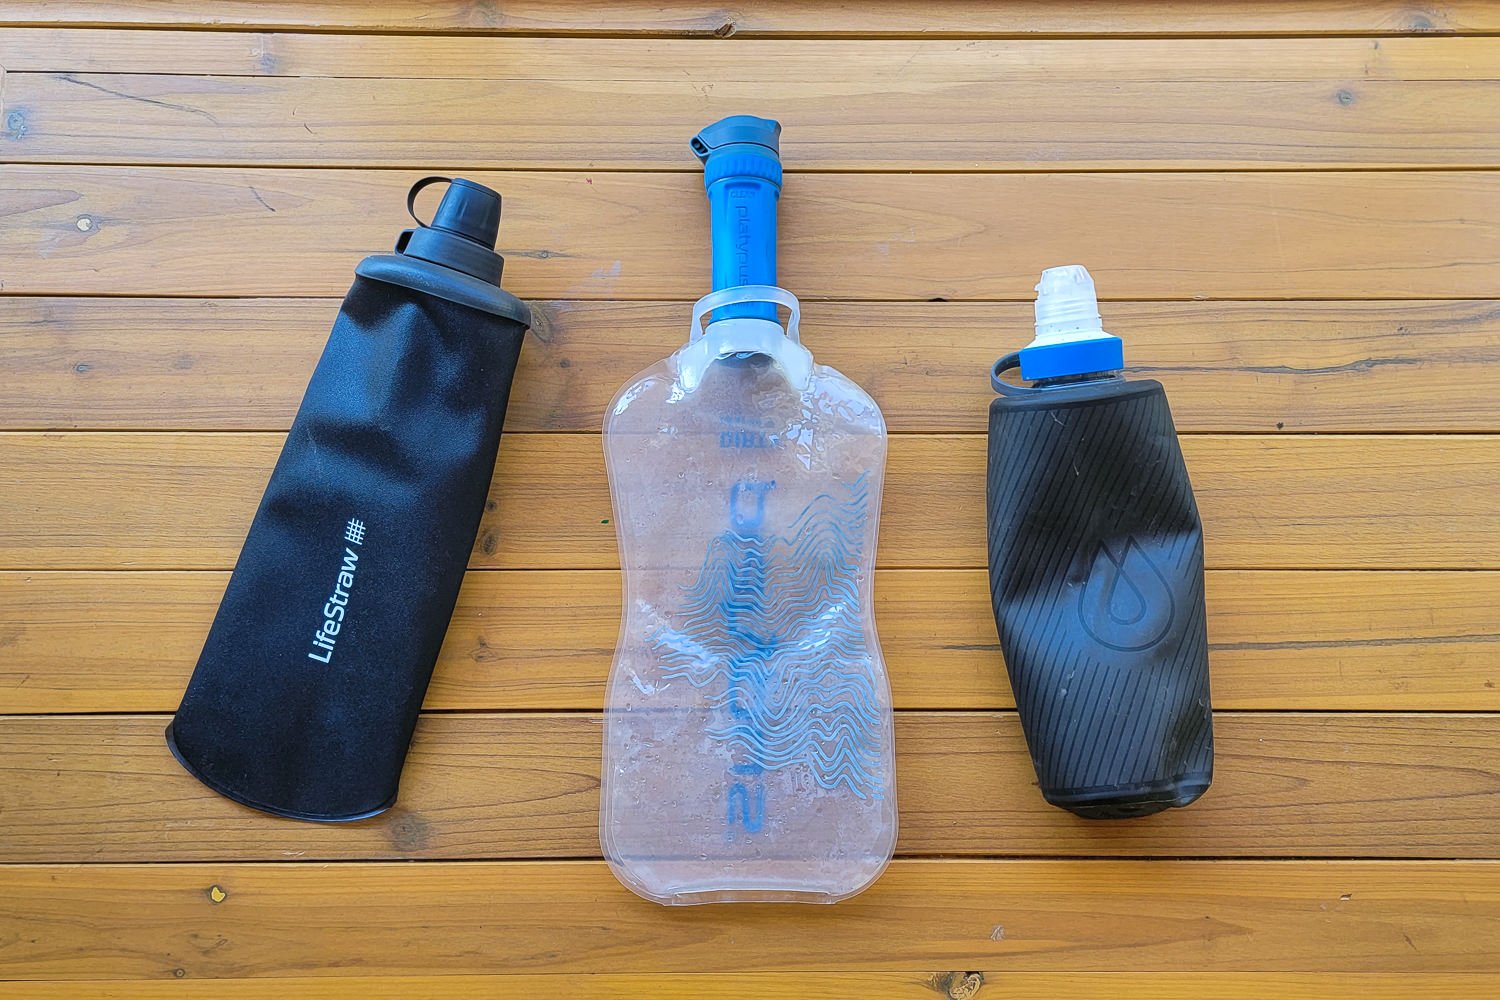 Left to right: LifeStraw Peak Squeeze, Platypus QuickDraw & Katadyn BeFree with the Hydrapak Flux Bottle